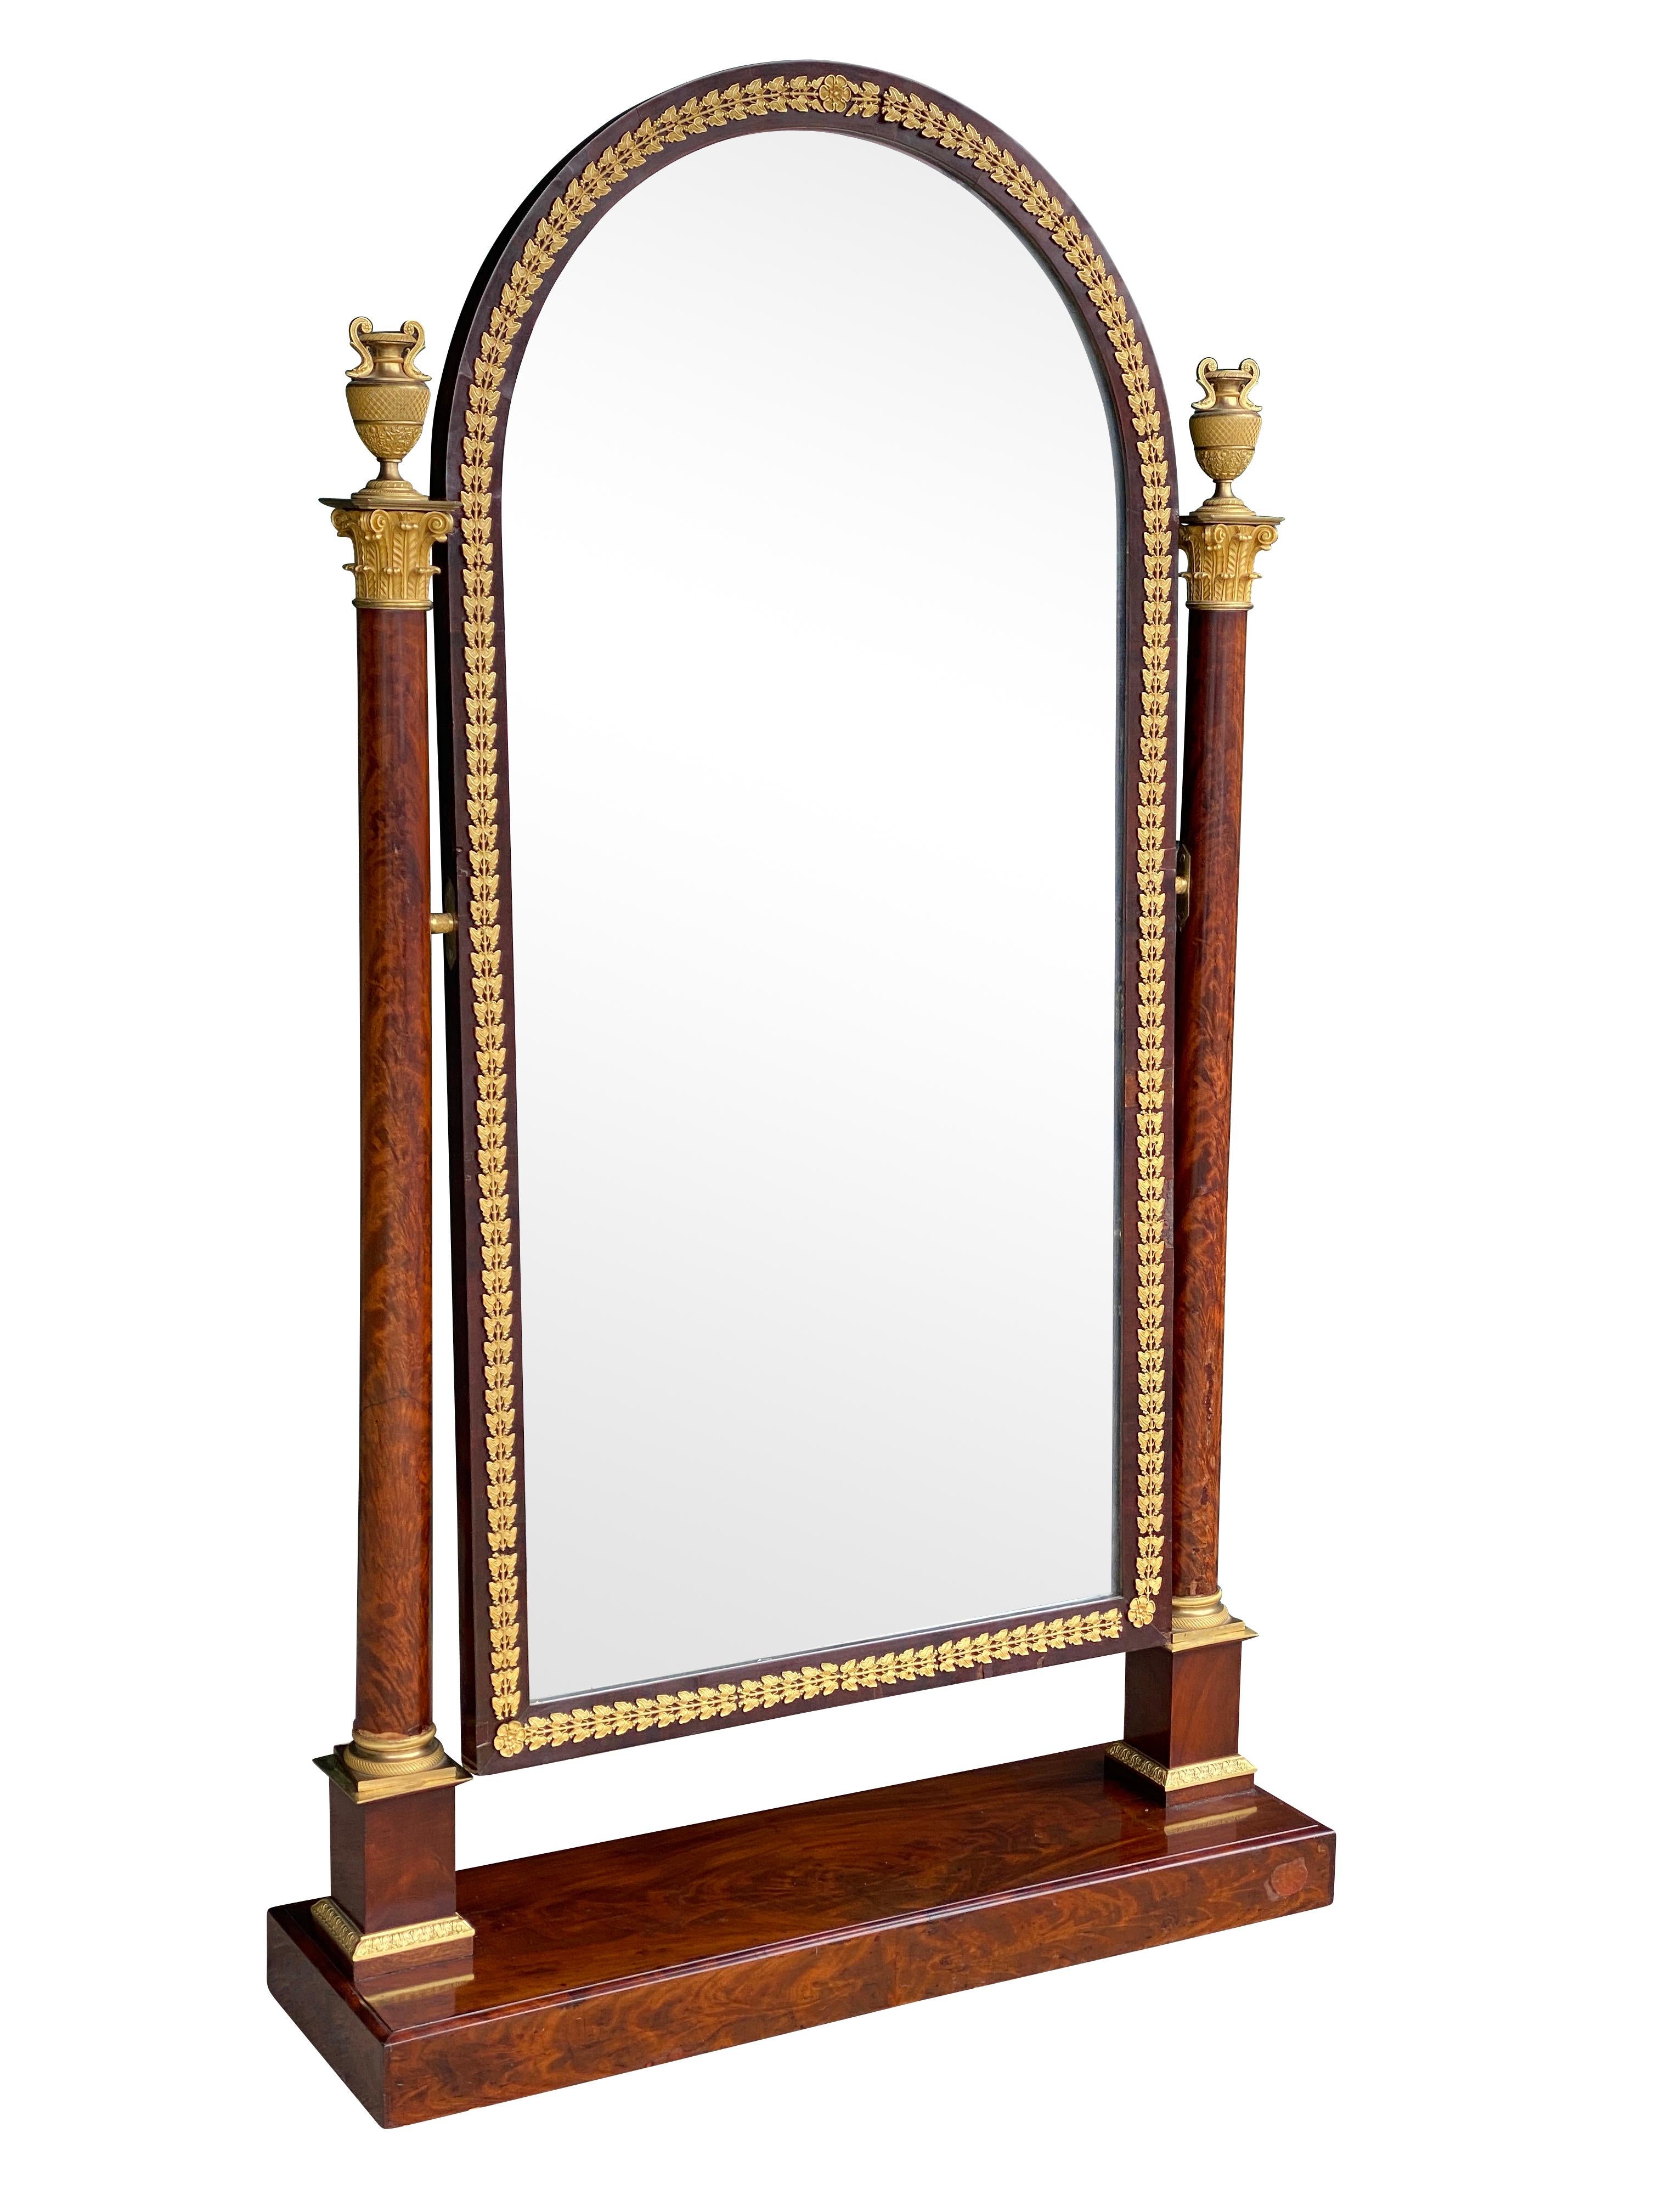 With an arched mirror set in a conforming frame and able to swing and adjust, flanked by a pair of columns with Corinthian capitals and urn finials, square plinth base. Casters.